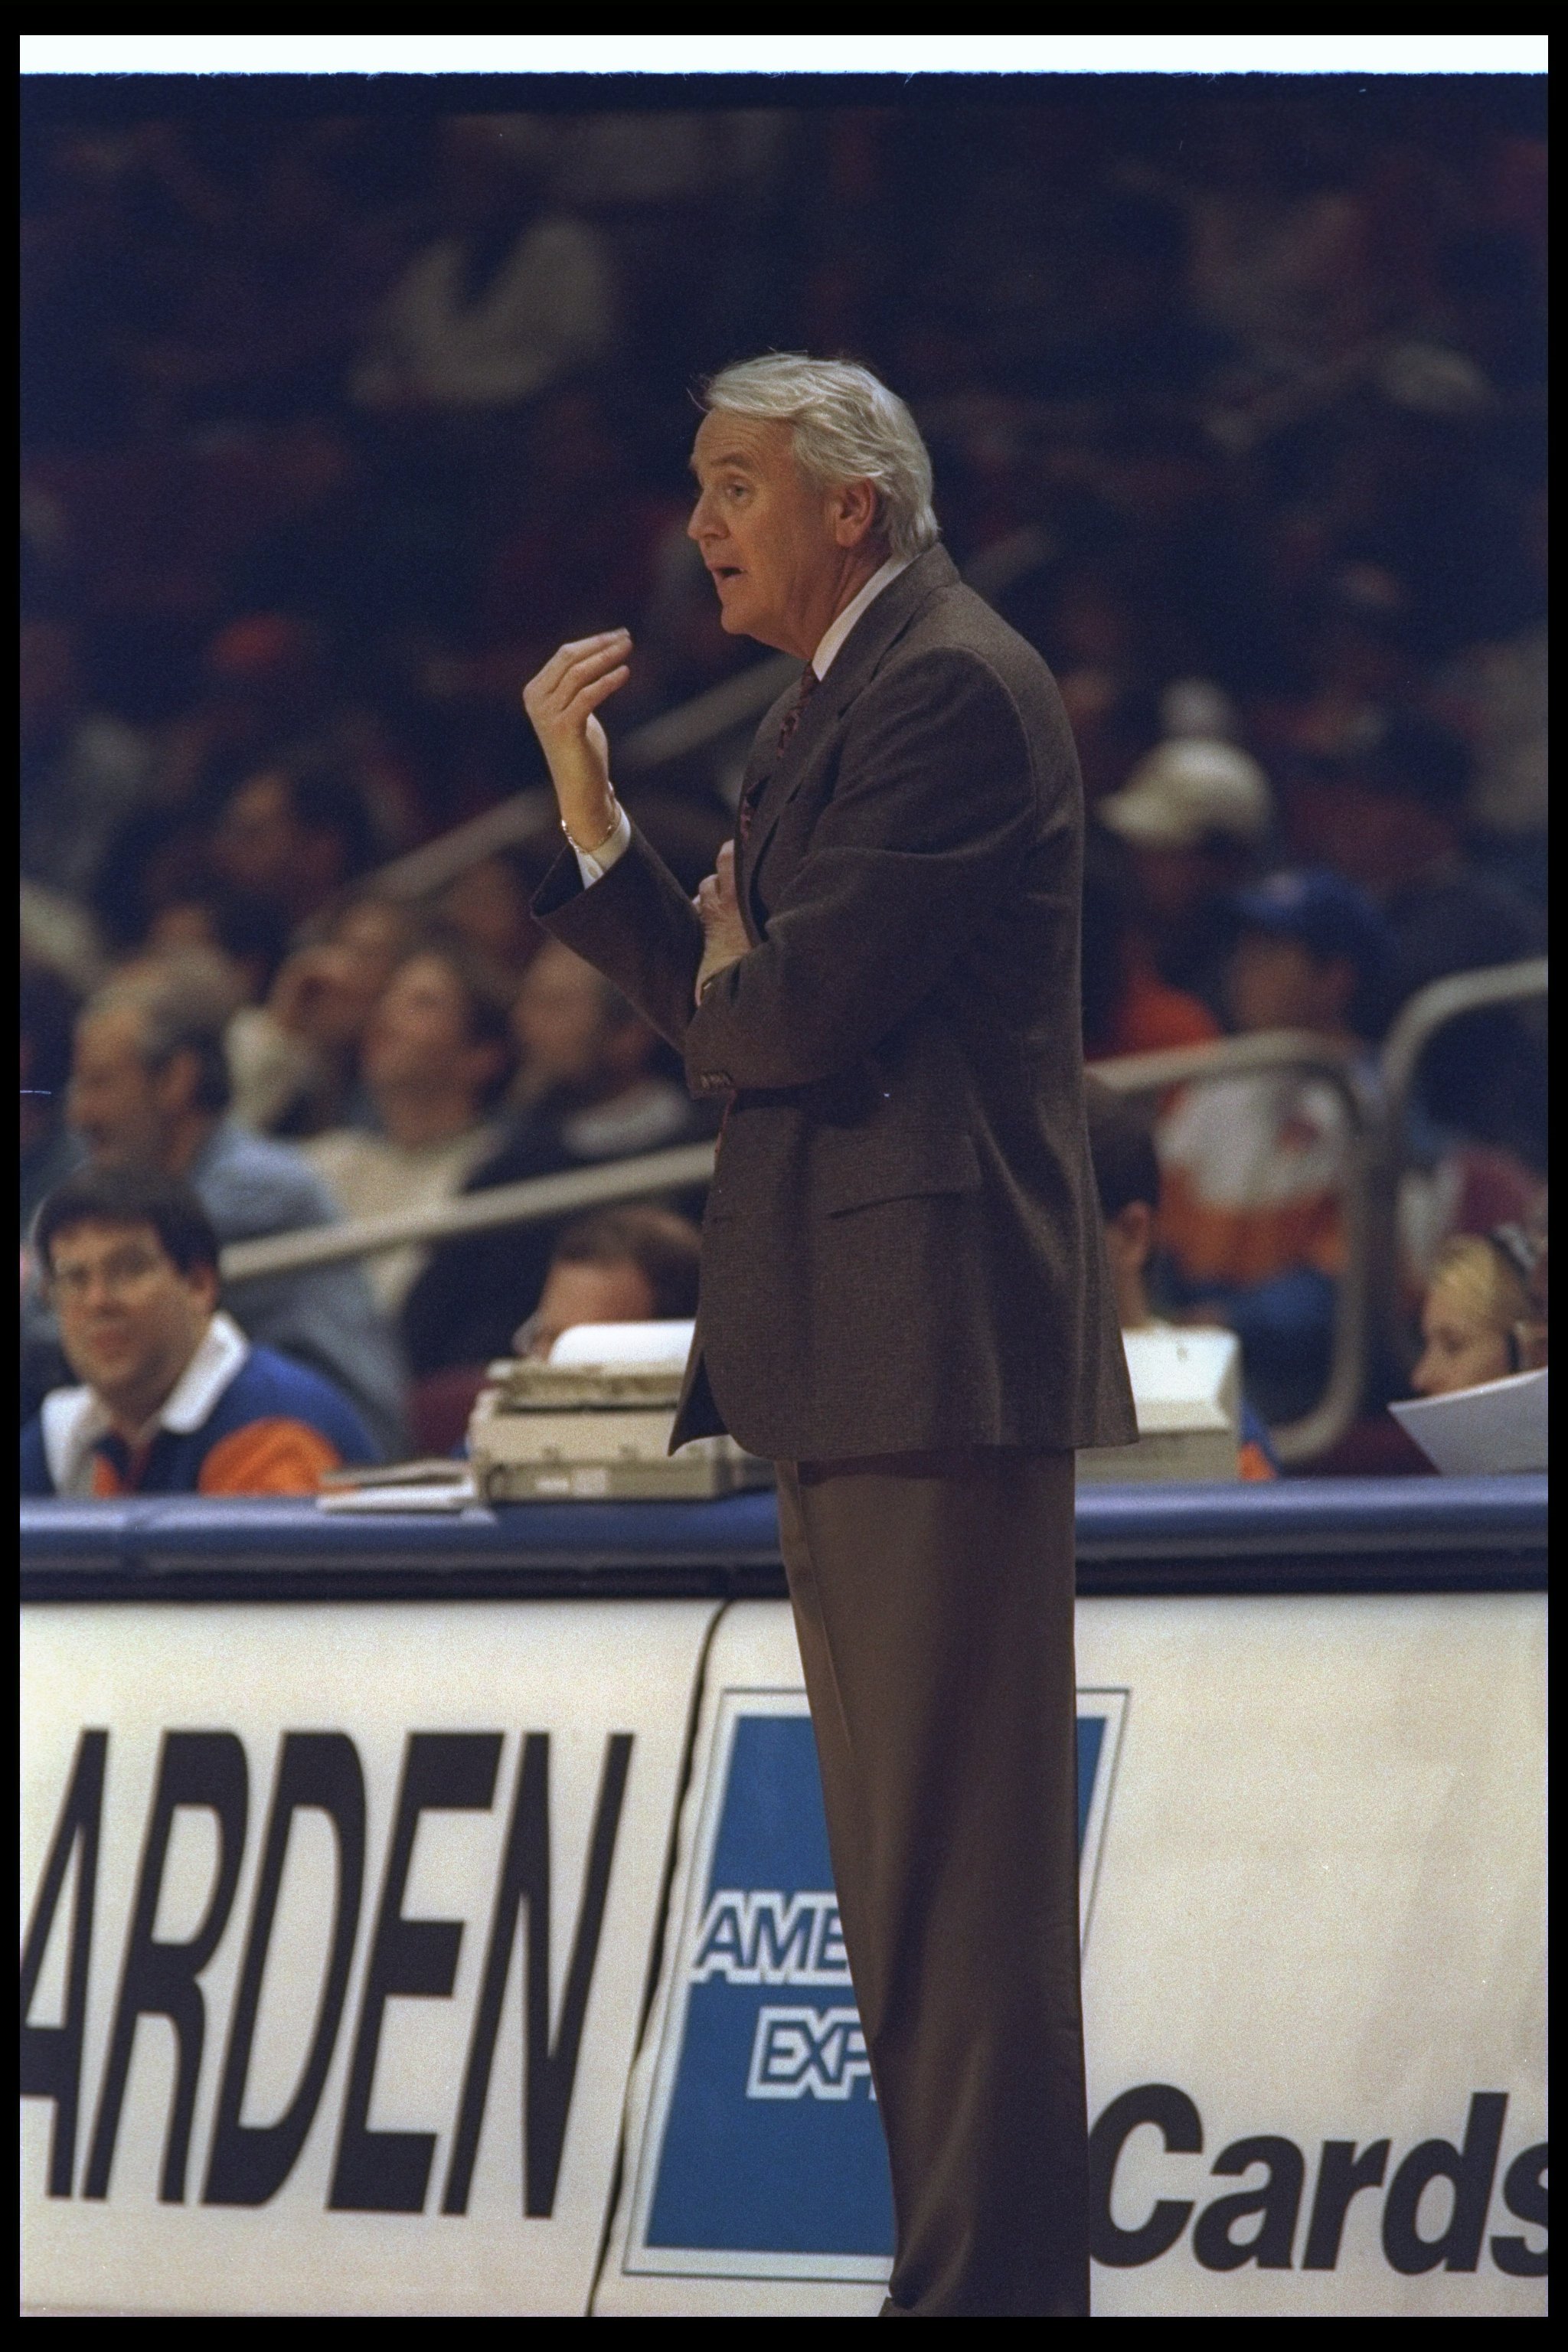 Minnesota Timberwolves head coach Bill Blair looks on during a game against the New York Knicks at Madison Square Garden in New York City, New York.